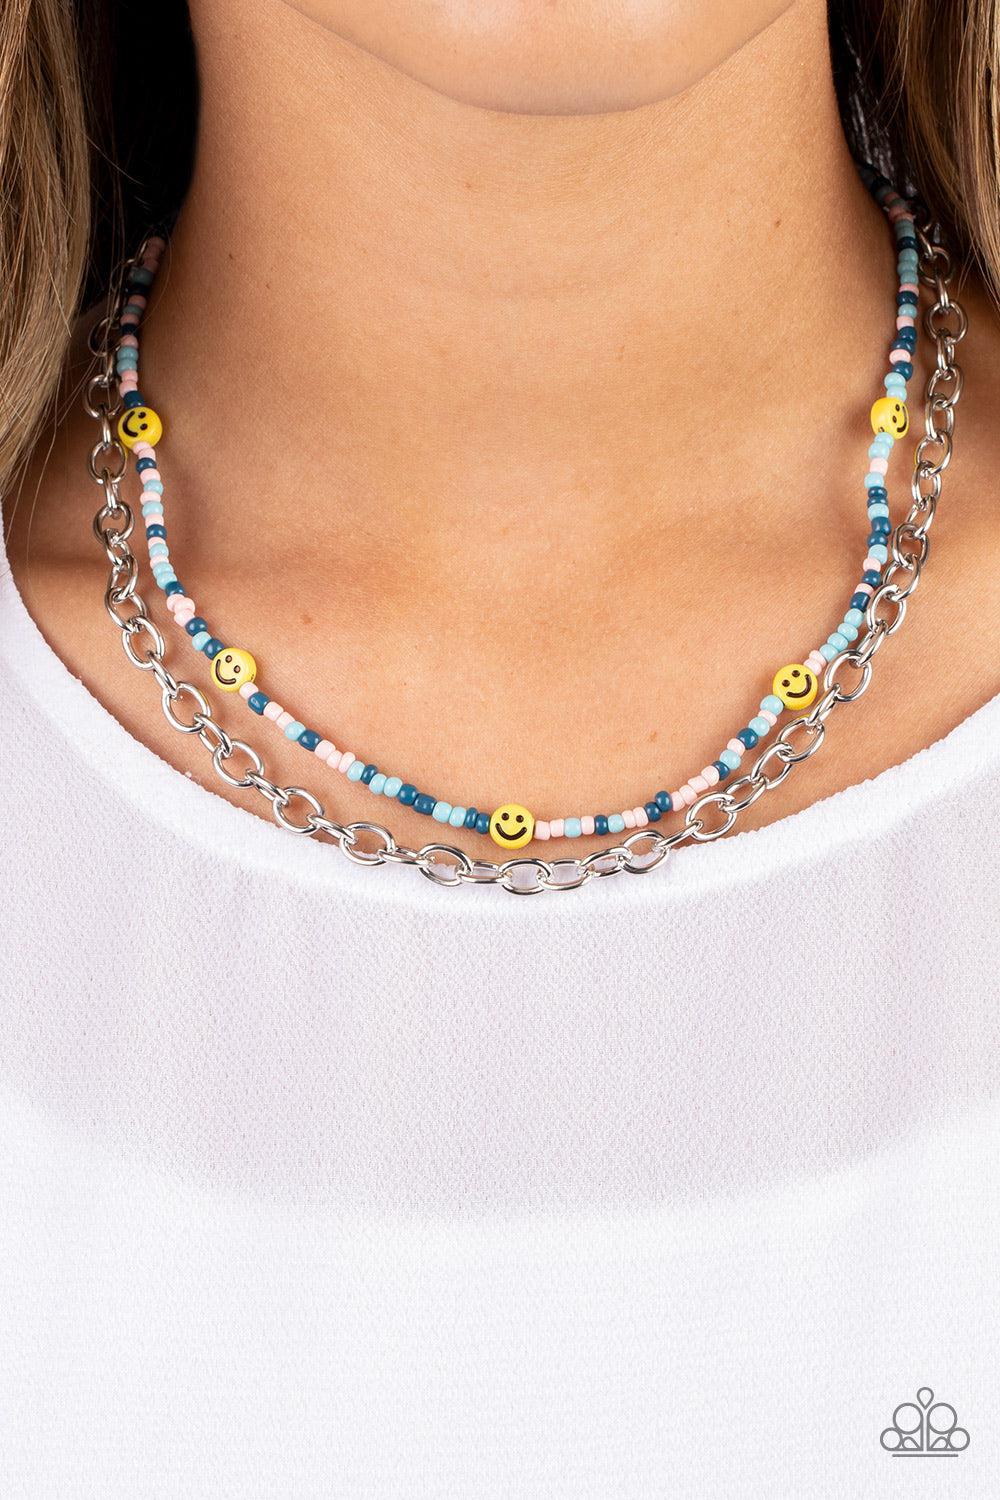 Happy Looks Good on You Blue Necklace - Paparazzi Accessories-on model - CarasShop.com - $5 Jewelry by Cara Jewels